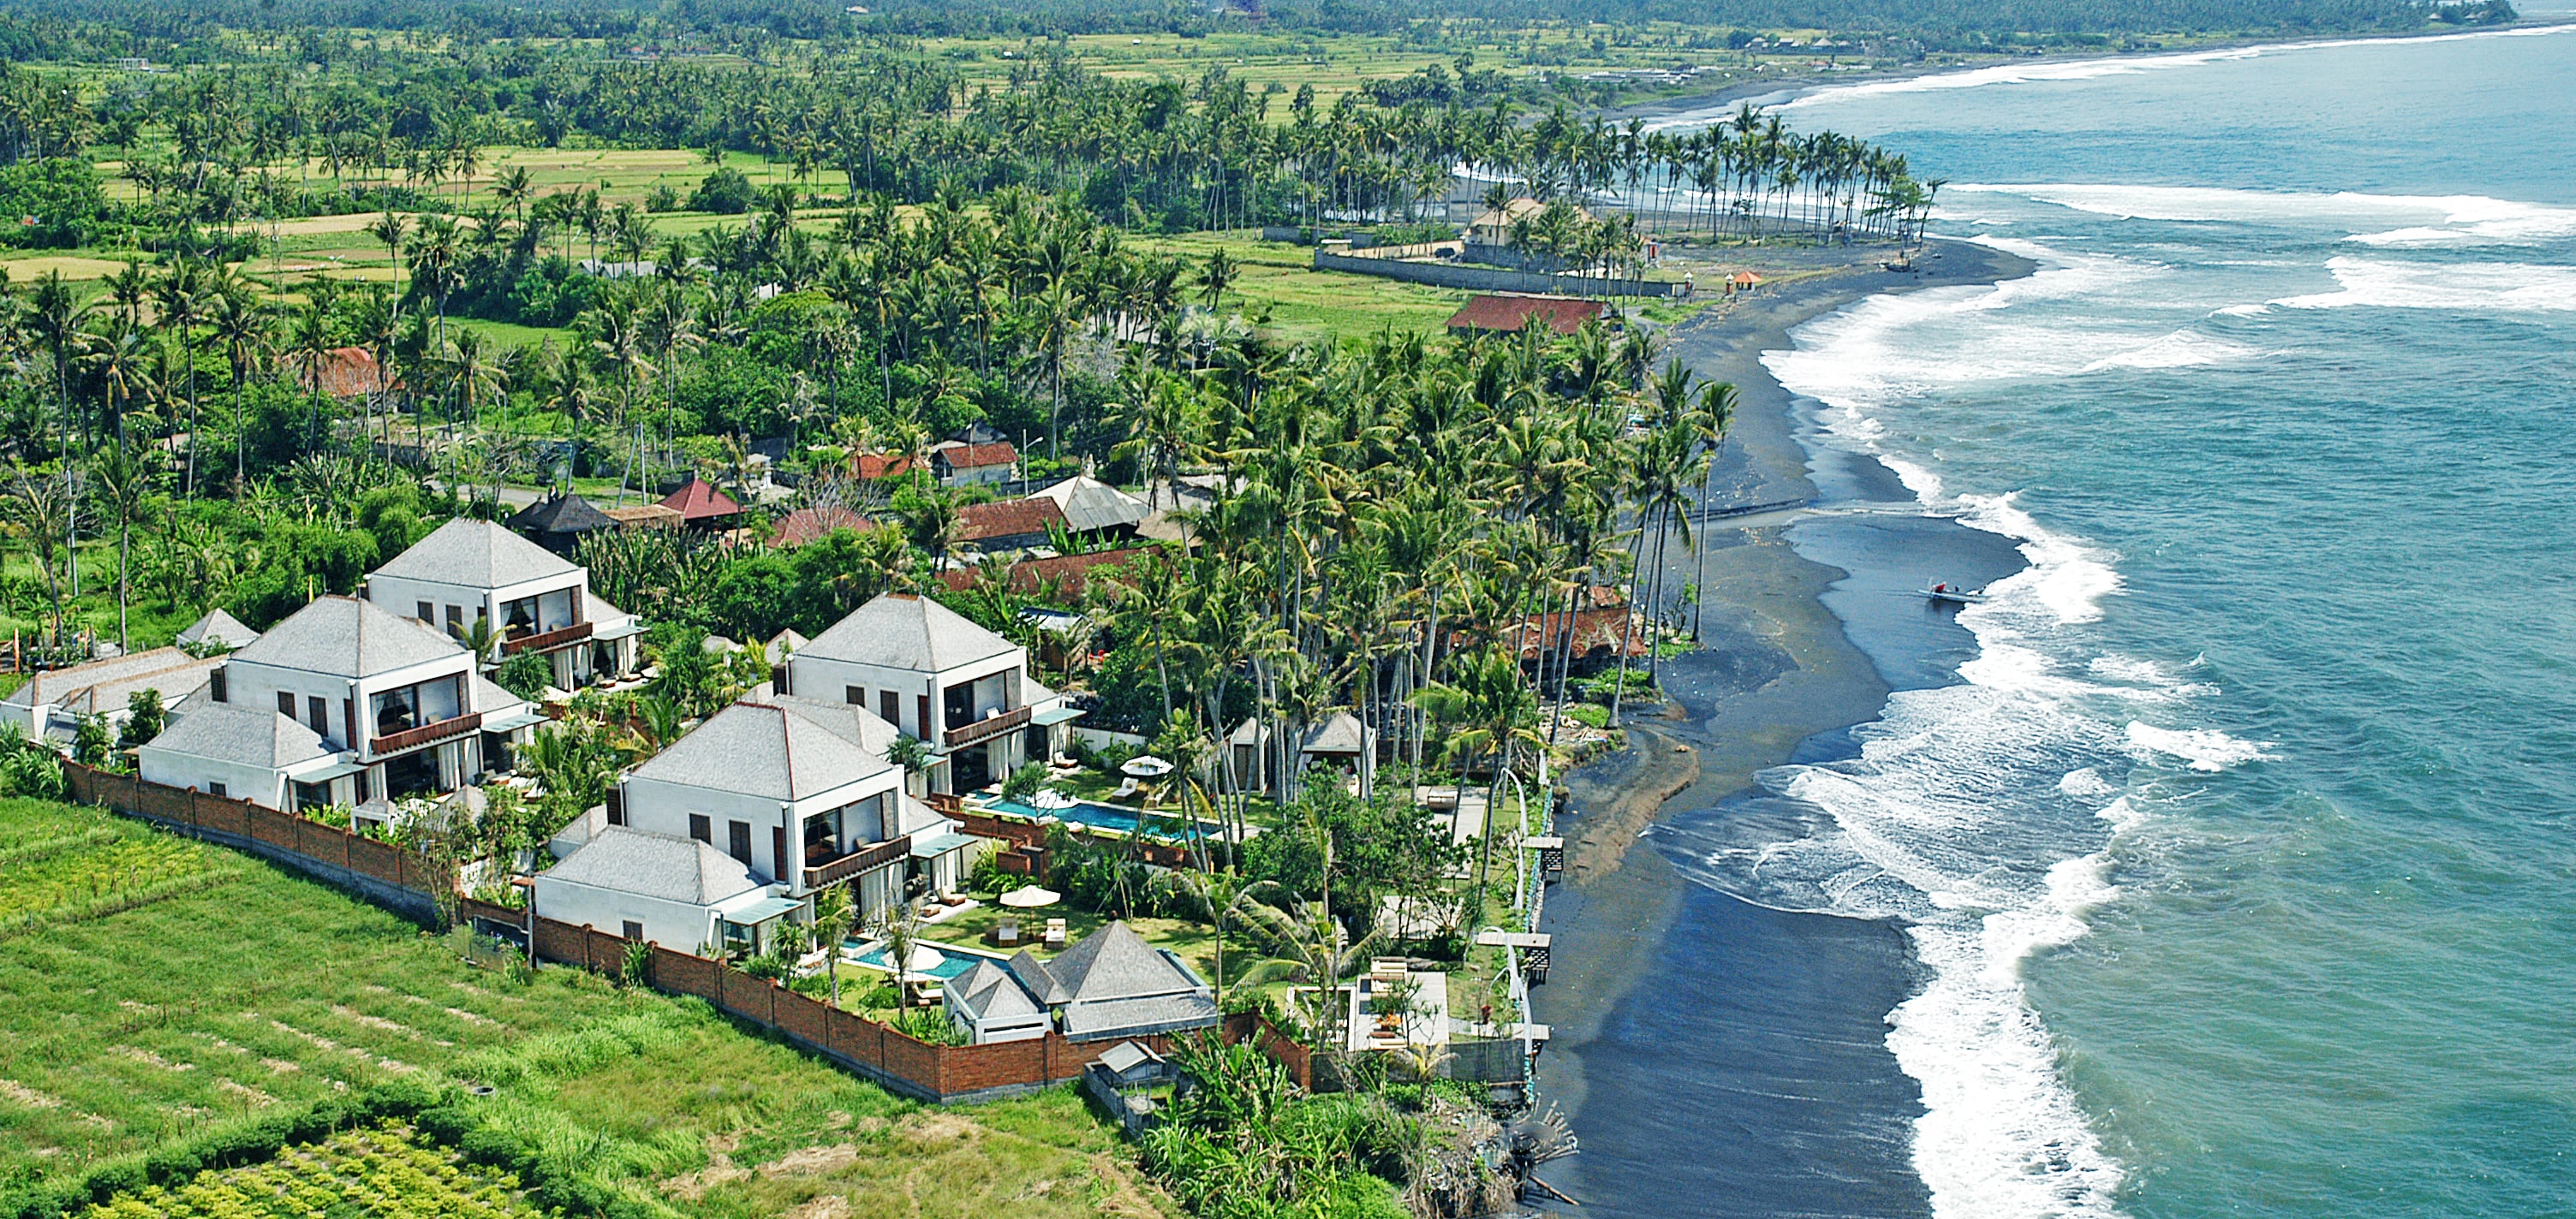 Tucked in the quieter part of South Bali, iconic Sanur and Ubud with all restaurants